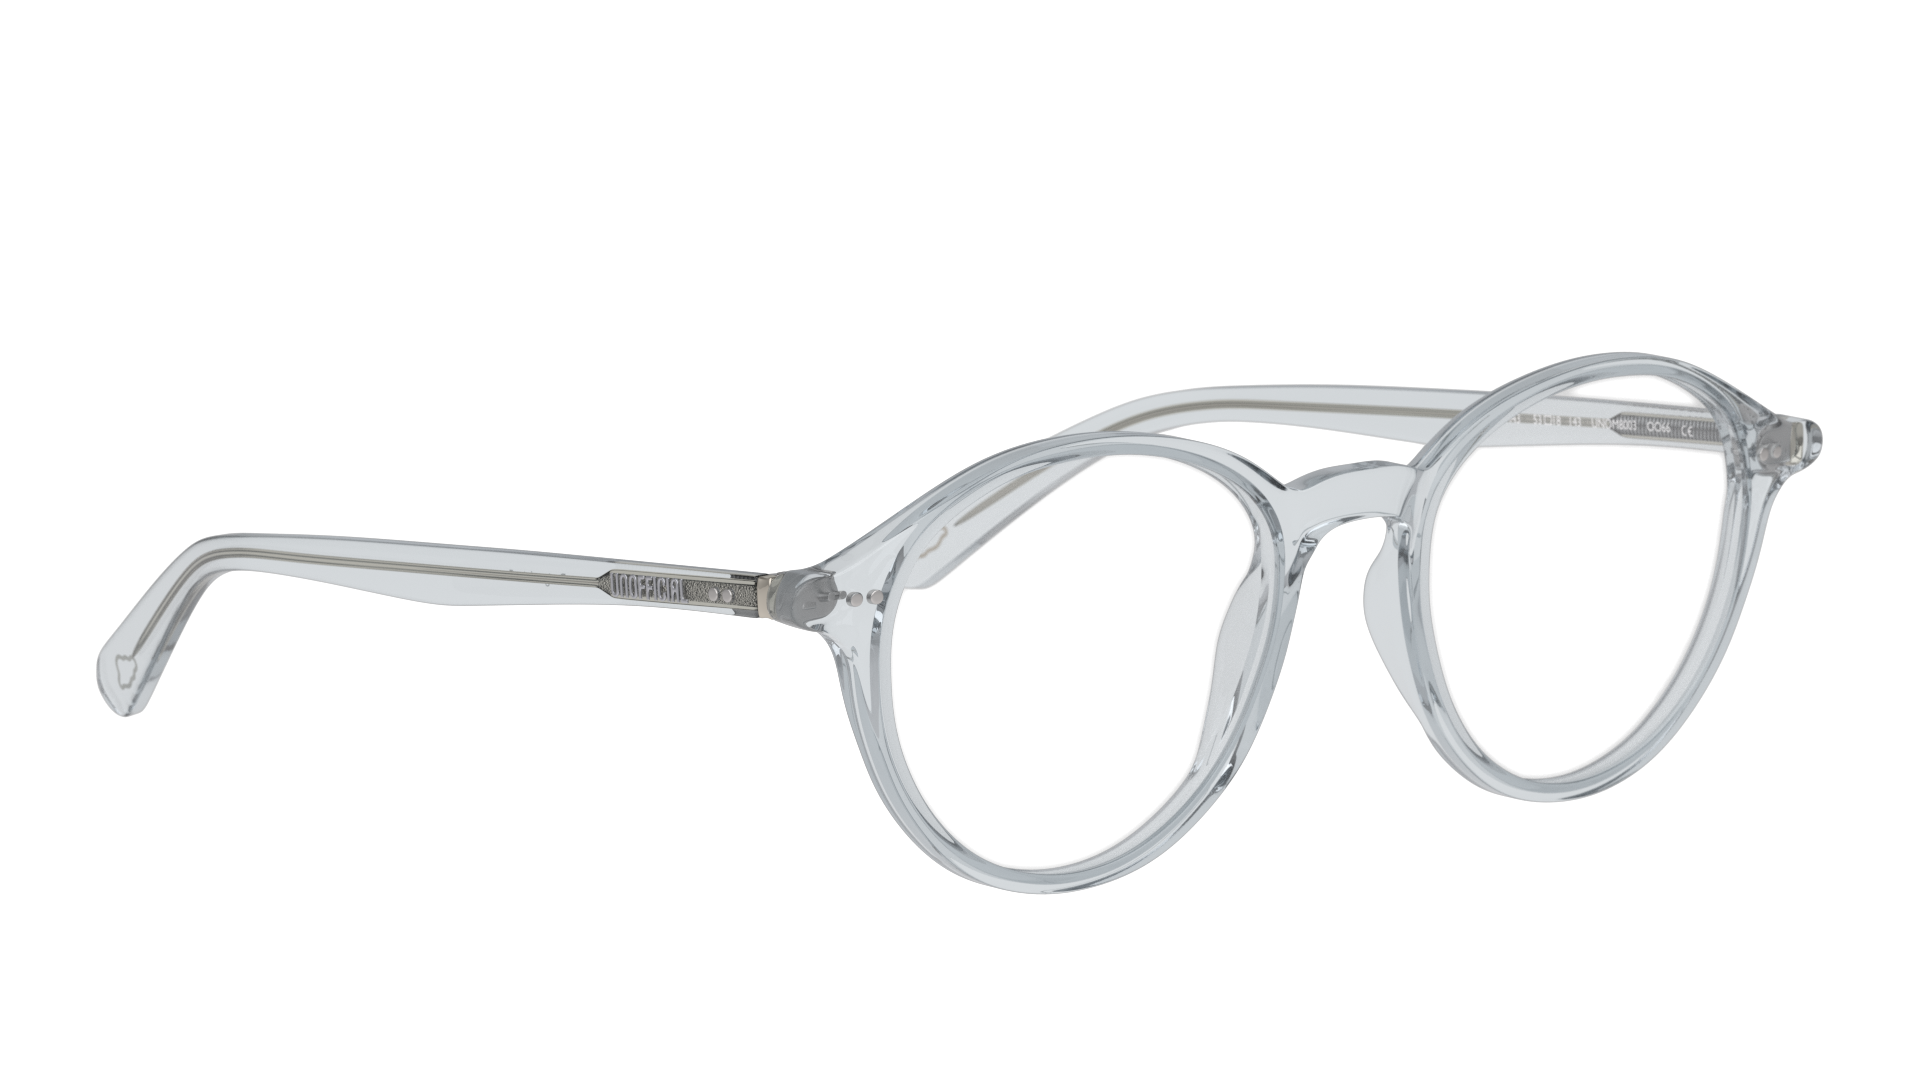 Angle_Right01 Unofficial UNOM0185 (GG00) Glasses Transparent / Grey